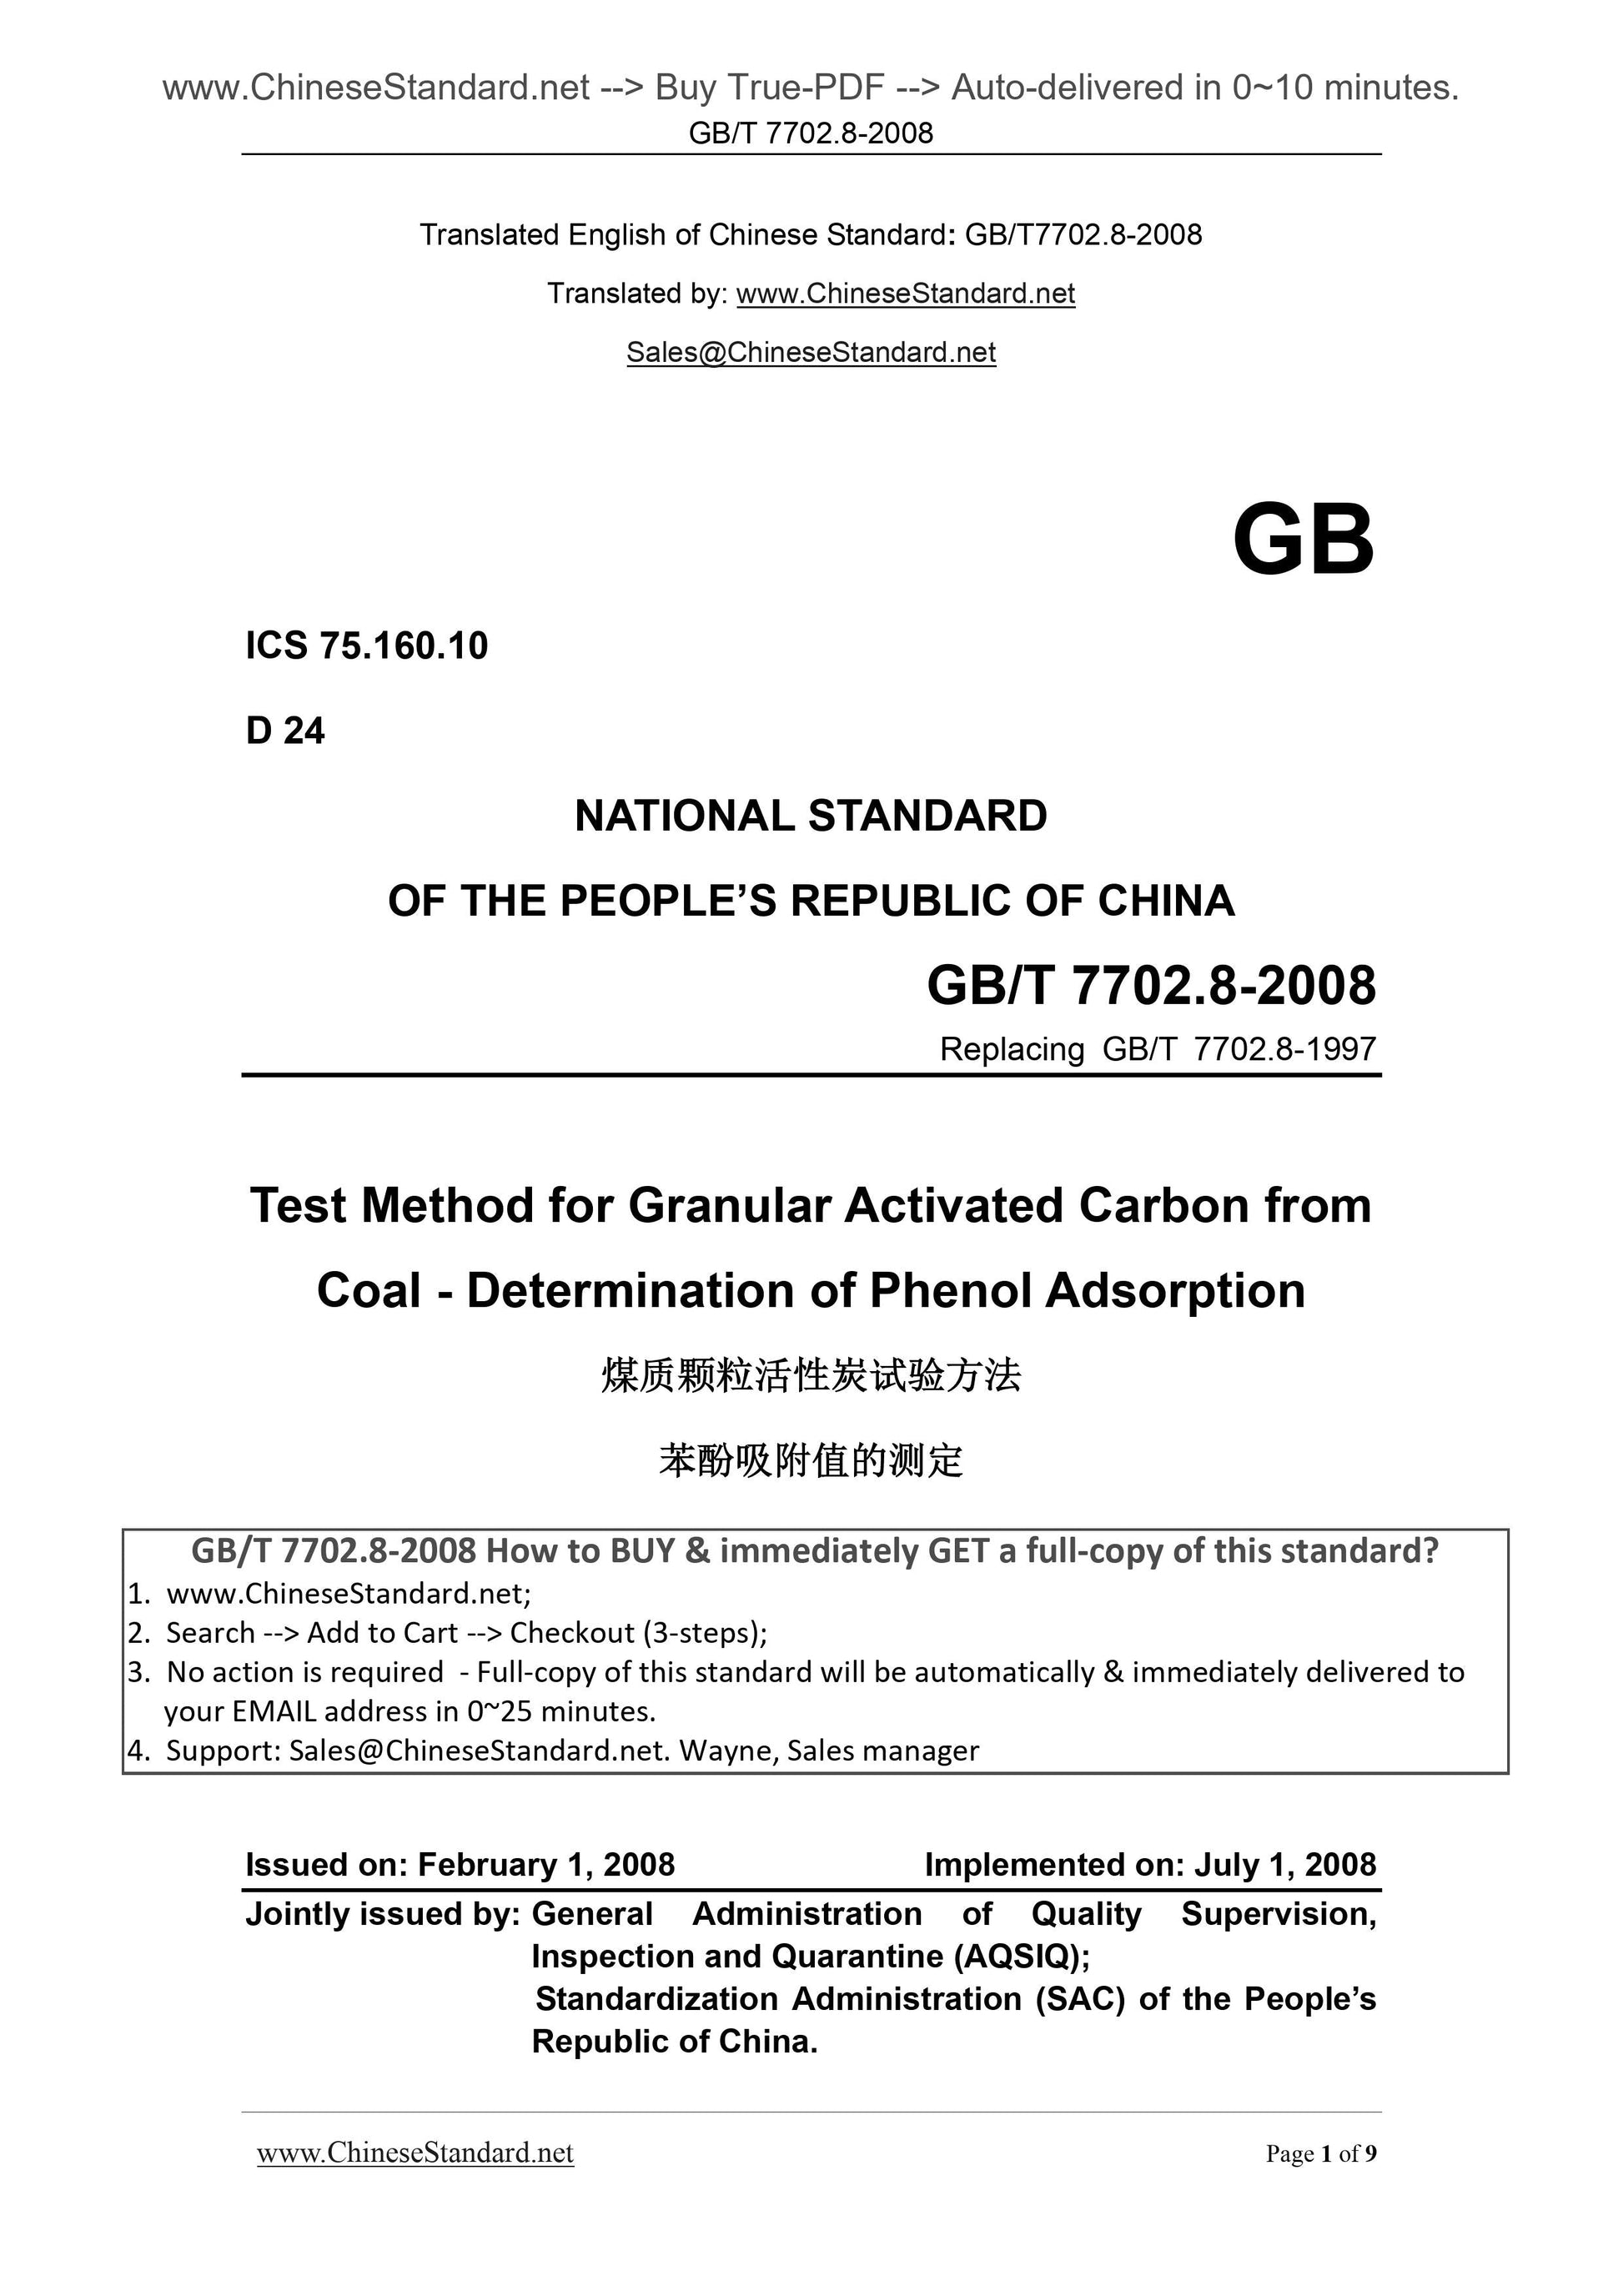 GB/T 7702.8-2008 Page 1